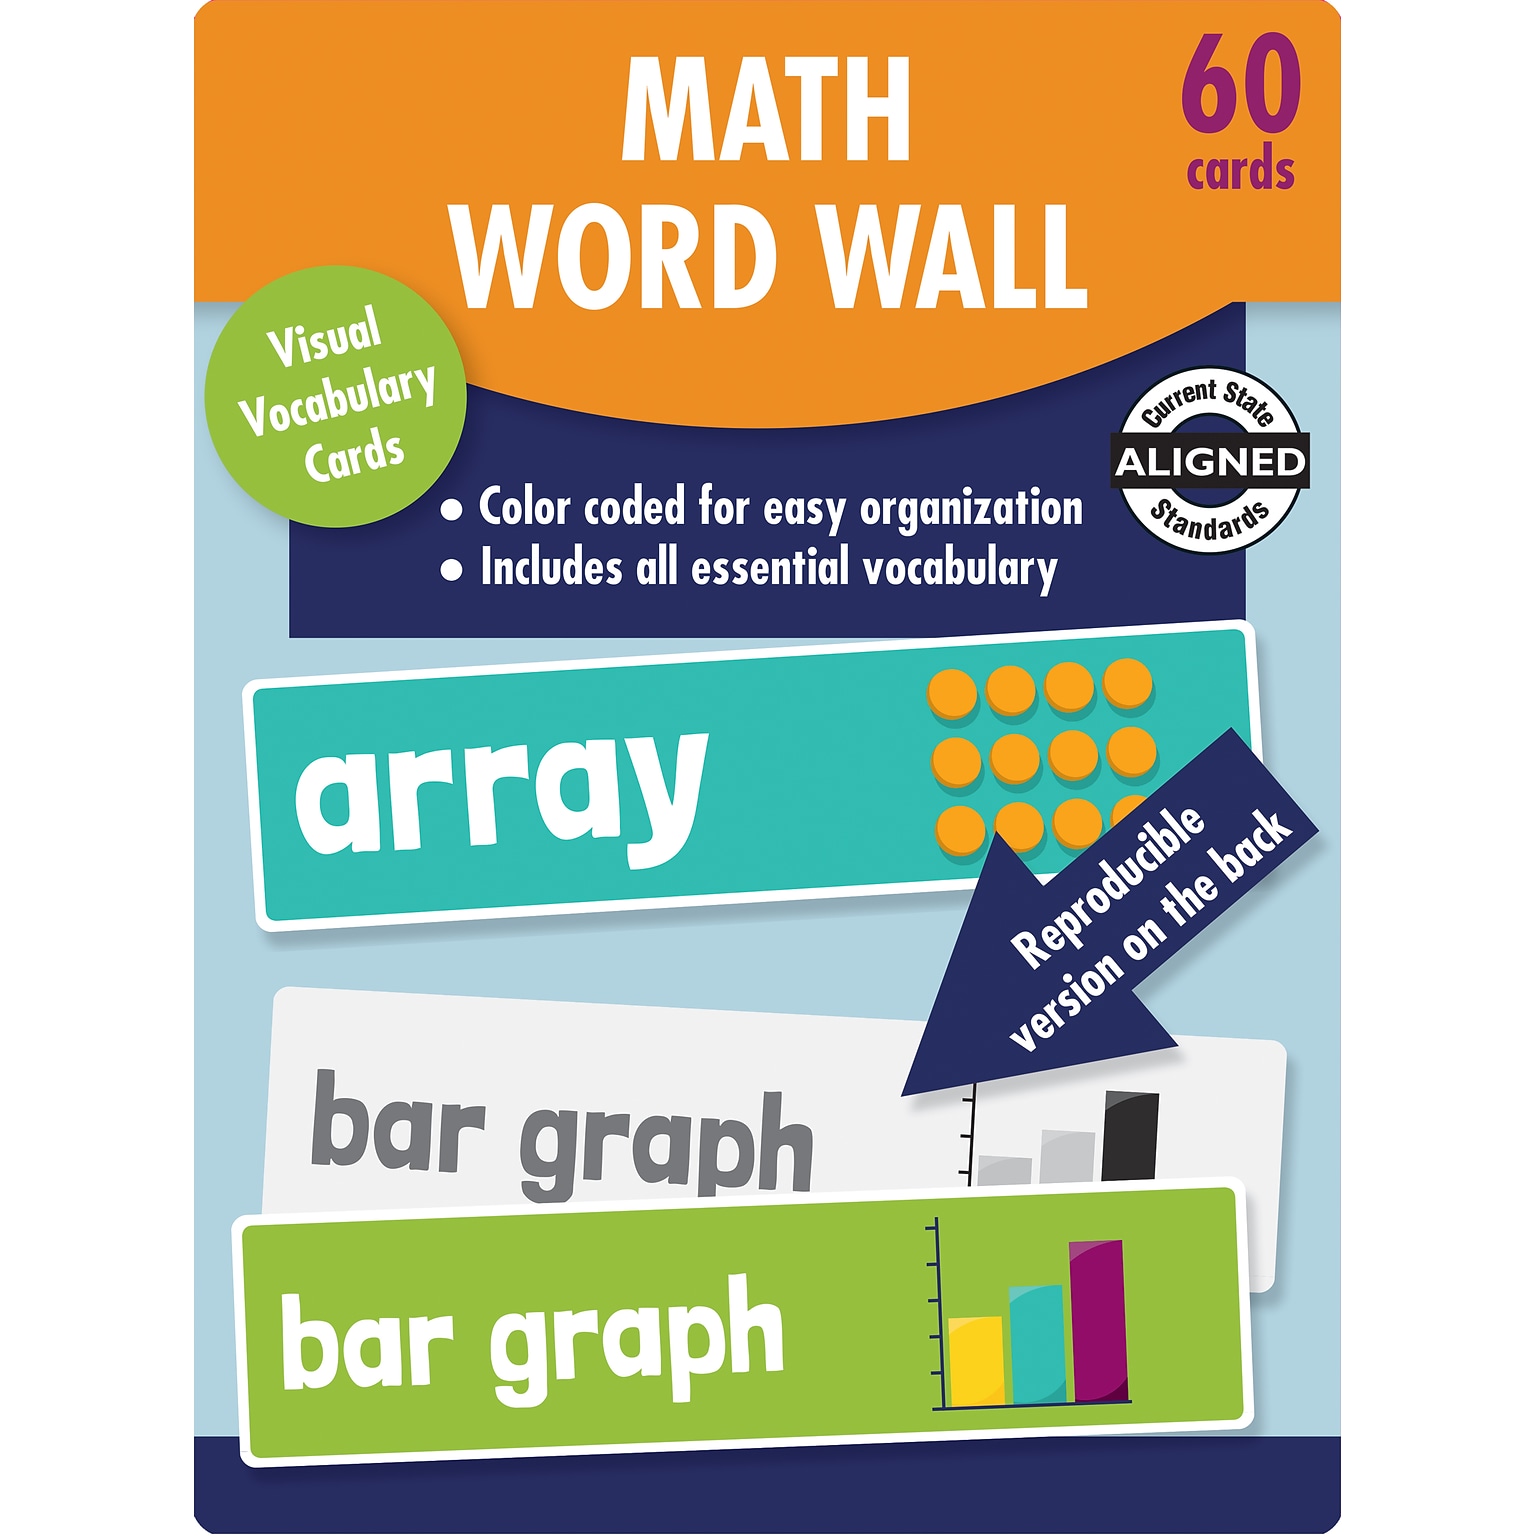 Carson-Dellosa Learning Cards Math Word Wall, Grade 2, 60 Cards/Set (145113)